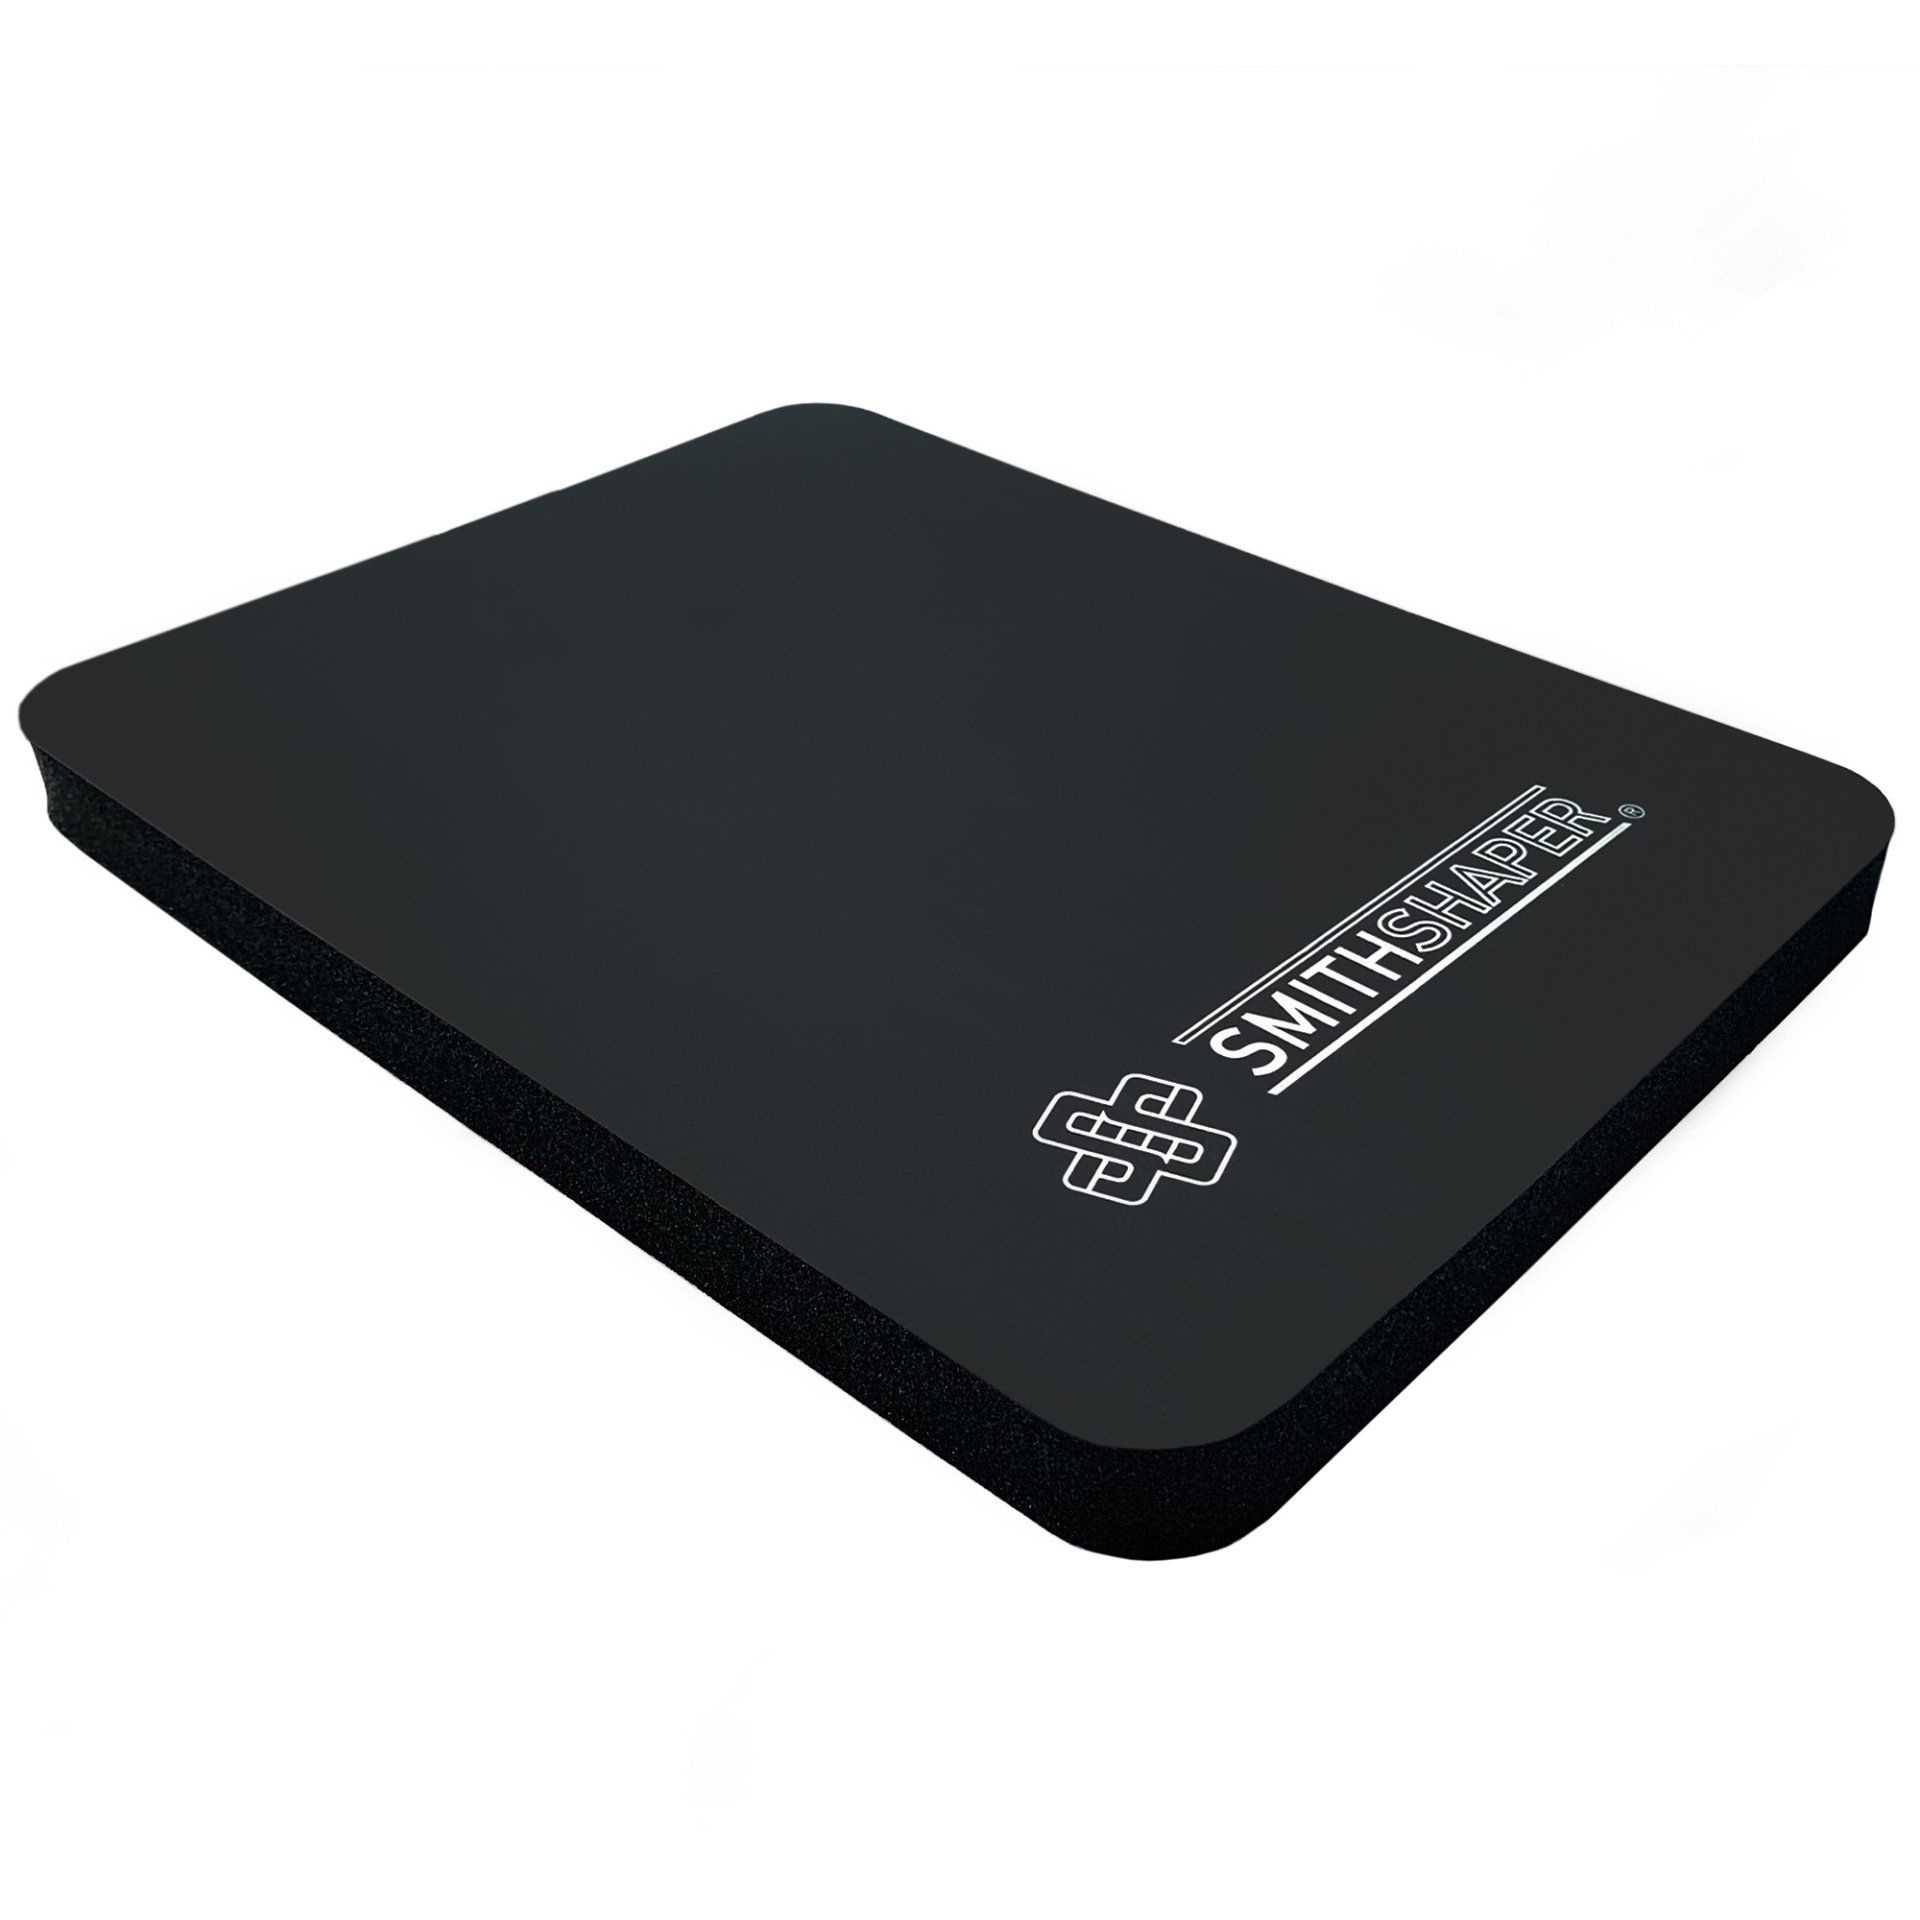 SmithShaper® Super Pad thick exercise kneeling pad